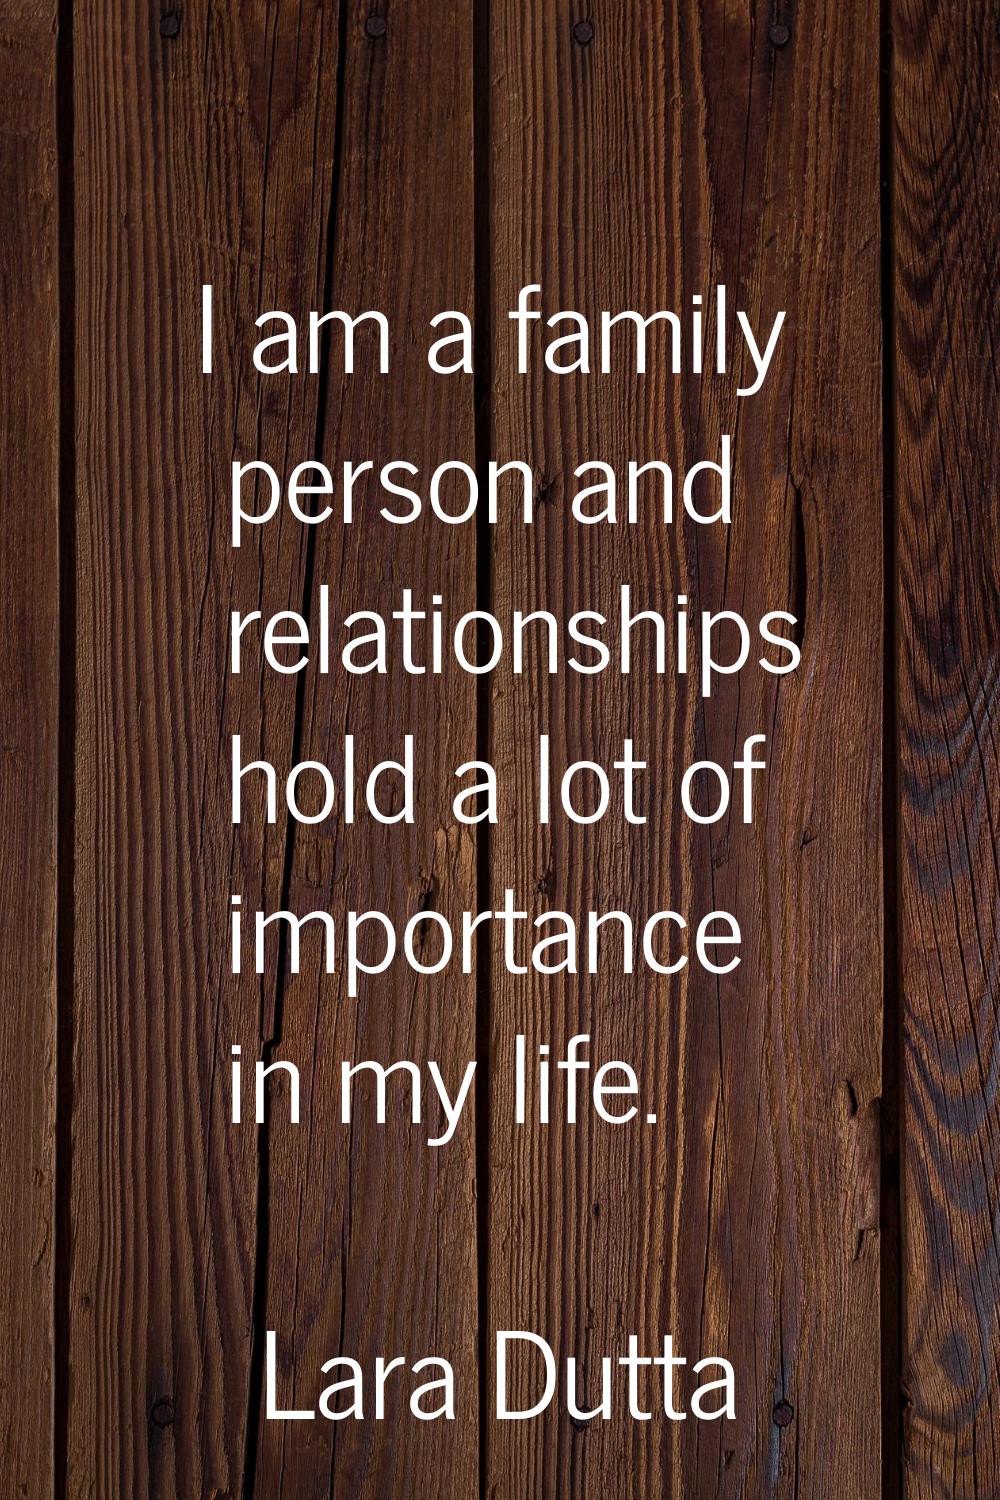 I am a family person and relationships hold a lot of importance in my life.